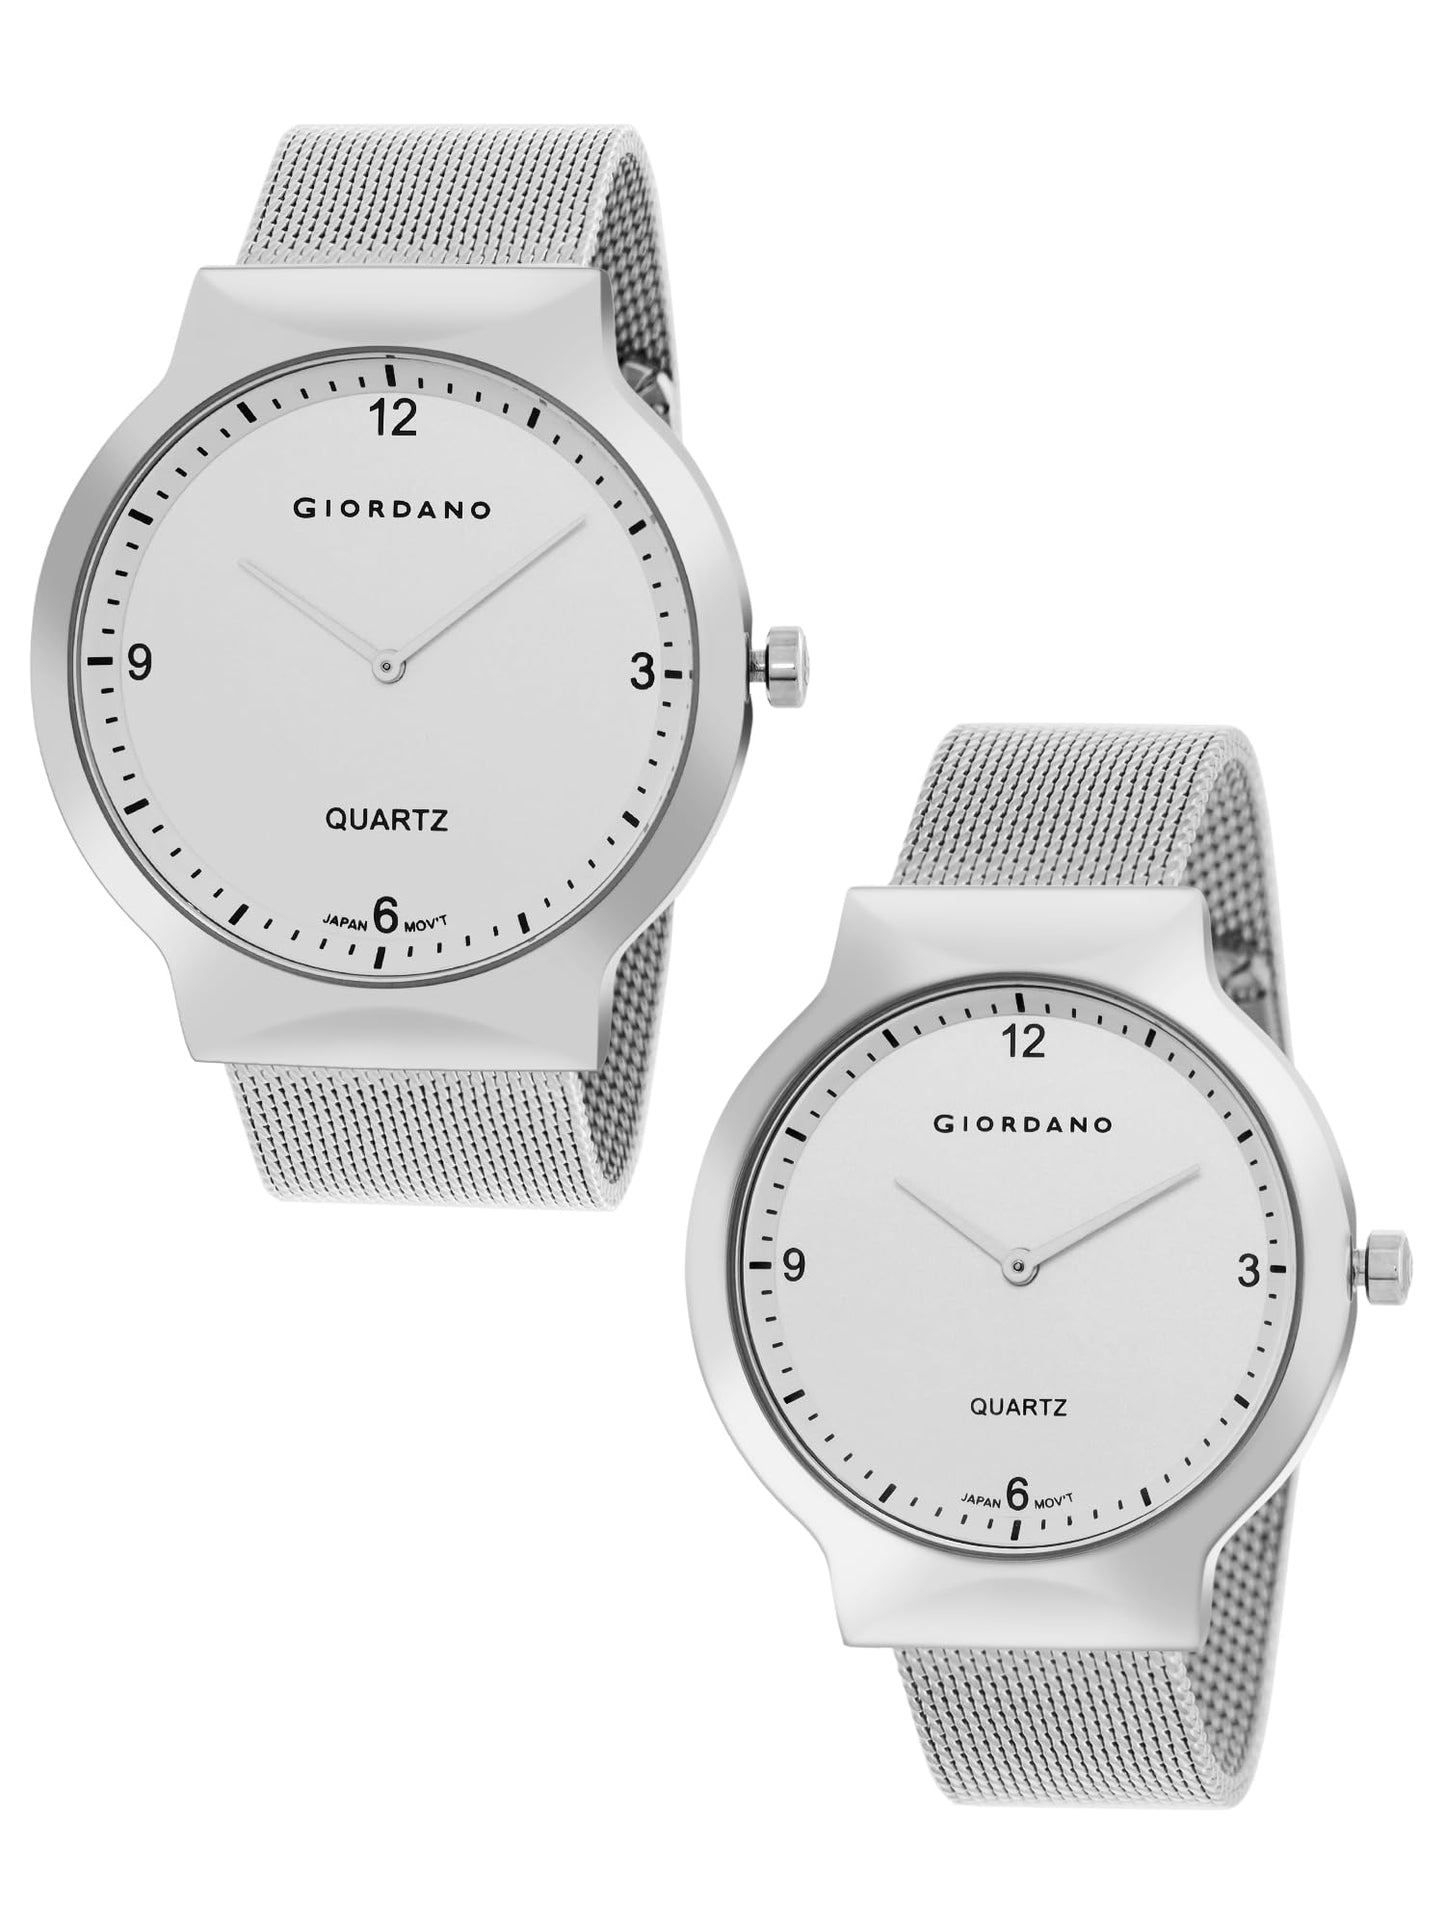 Giordano Analog Stylish Pair Wrist Watch for Couples Water Resistant Fashion Watch Round Shape with 2 Hand Mechanism to Compliment Your Look/Ideal Gift for Men & Women - GZ-987-SET